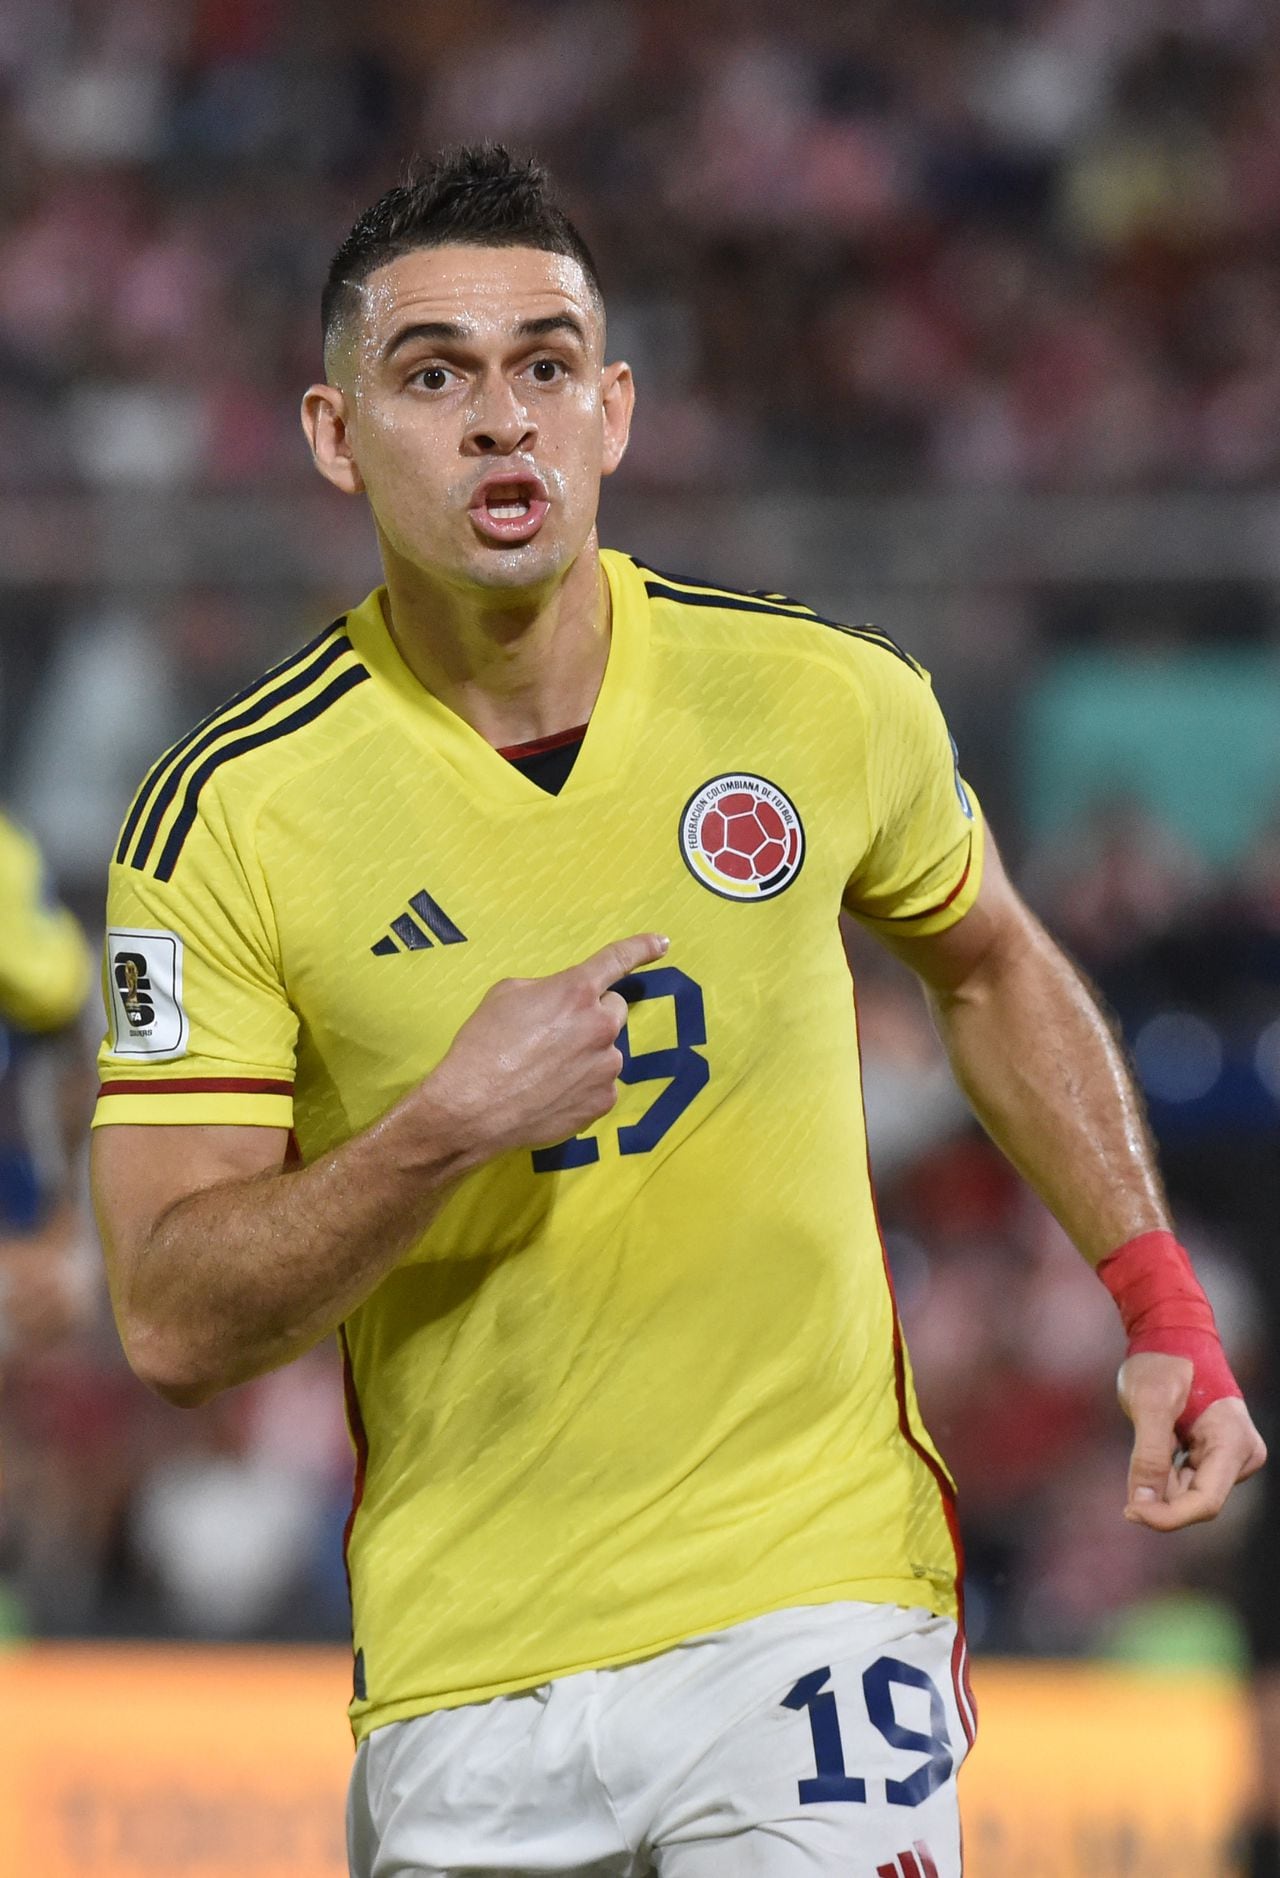 Colombia's forward Rafael Santos Borre celebrates after scoring a penalty during the 2026 FIFA World Cup South American qualifiers football match between Paraguay and Colombia at the Defensores del Chaco stadium in Asuncion on November 21, 2023. (Photo by NORBERTO DUARTE / AFP)